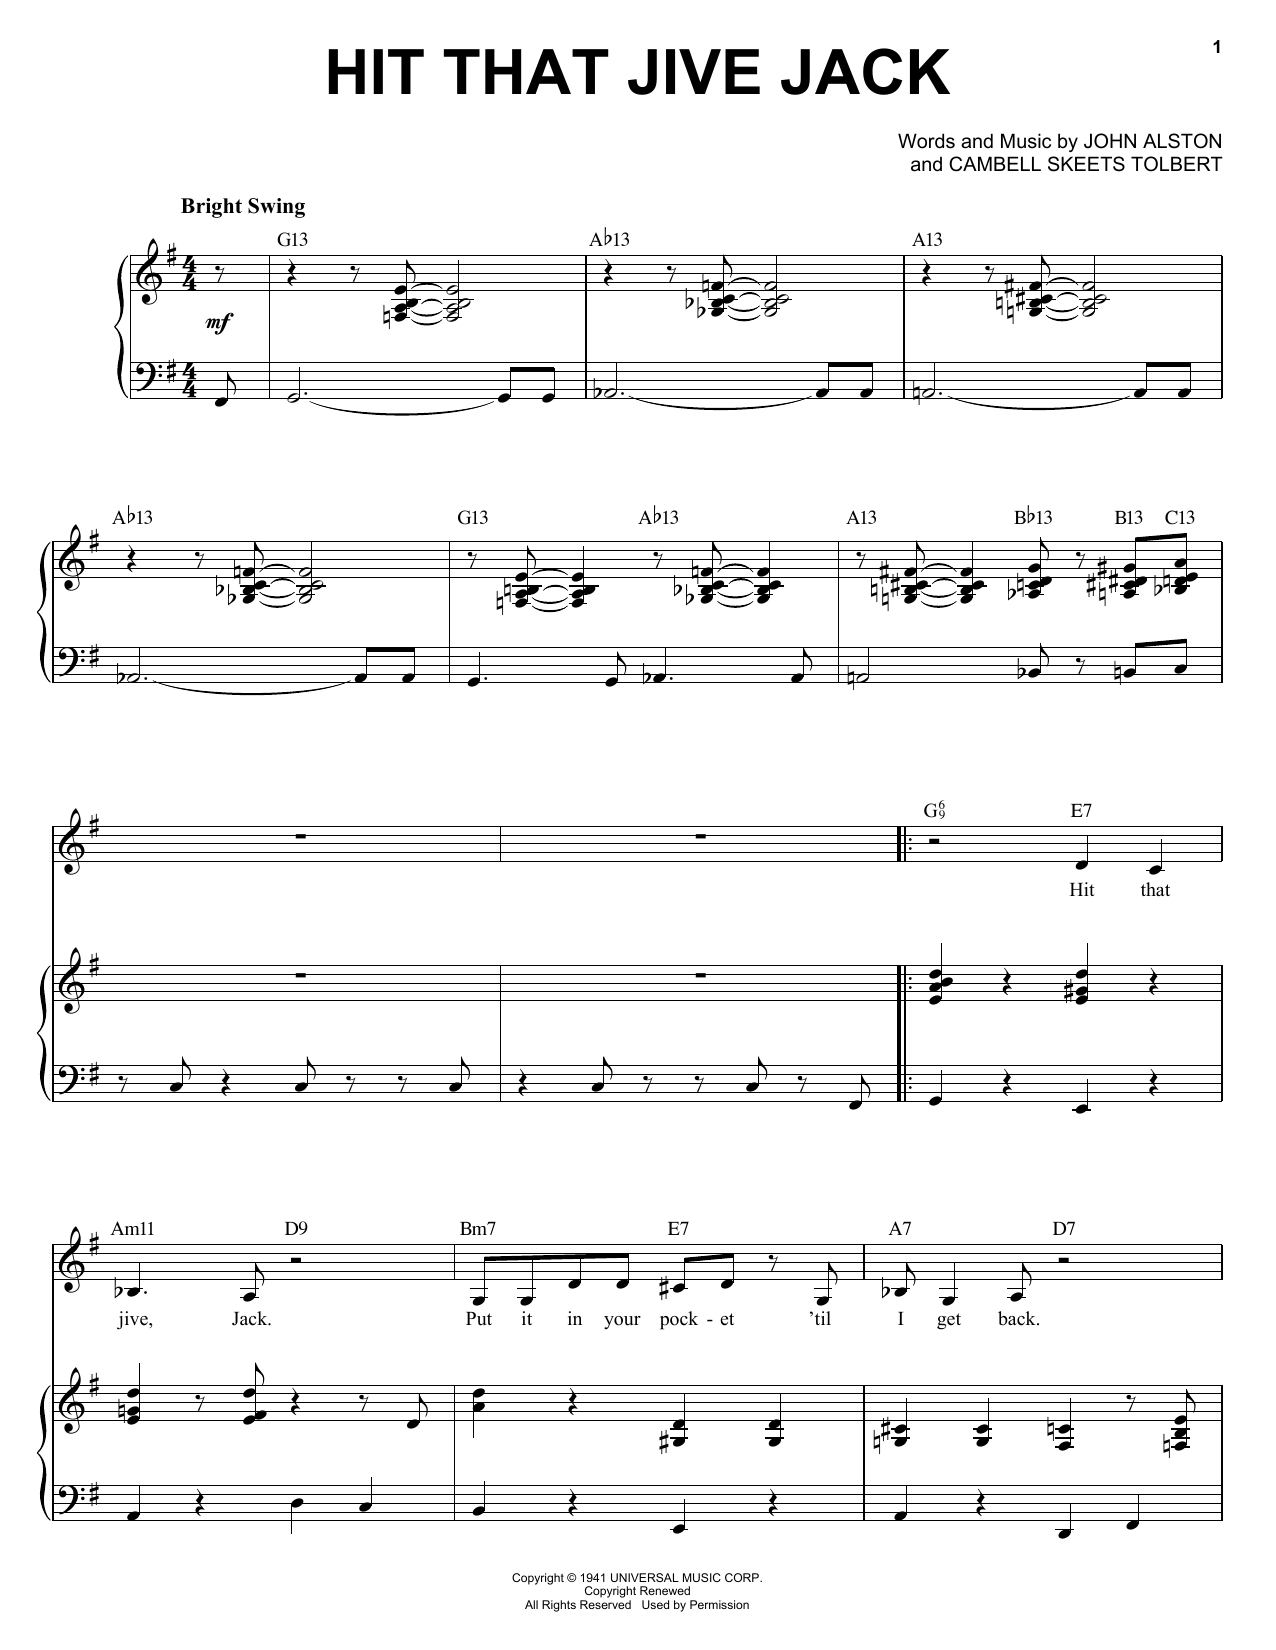 Diana Krall Hit That Jive Jack sheet music notes and chords. Download Printable PDF.